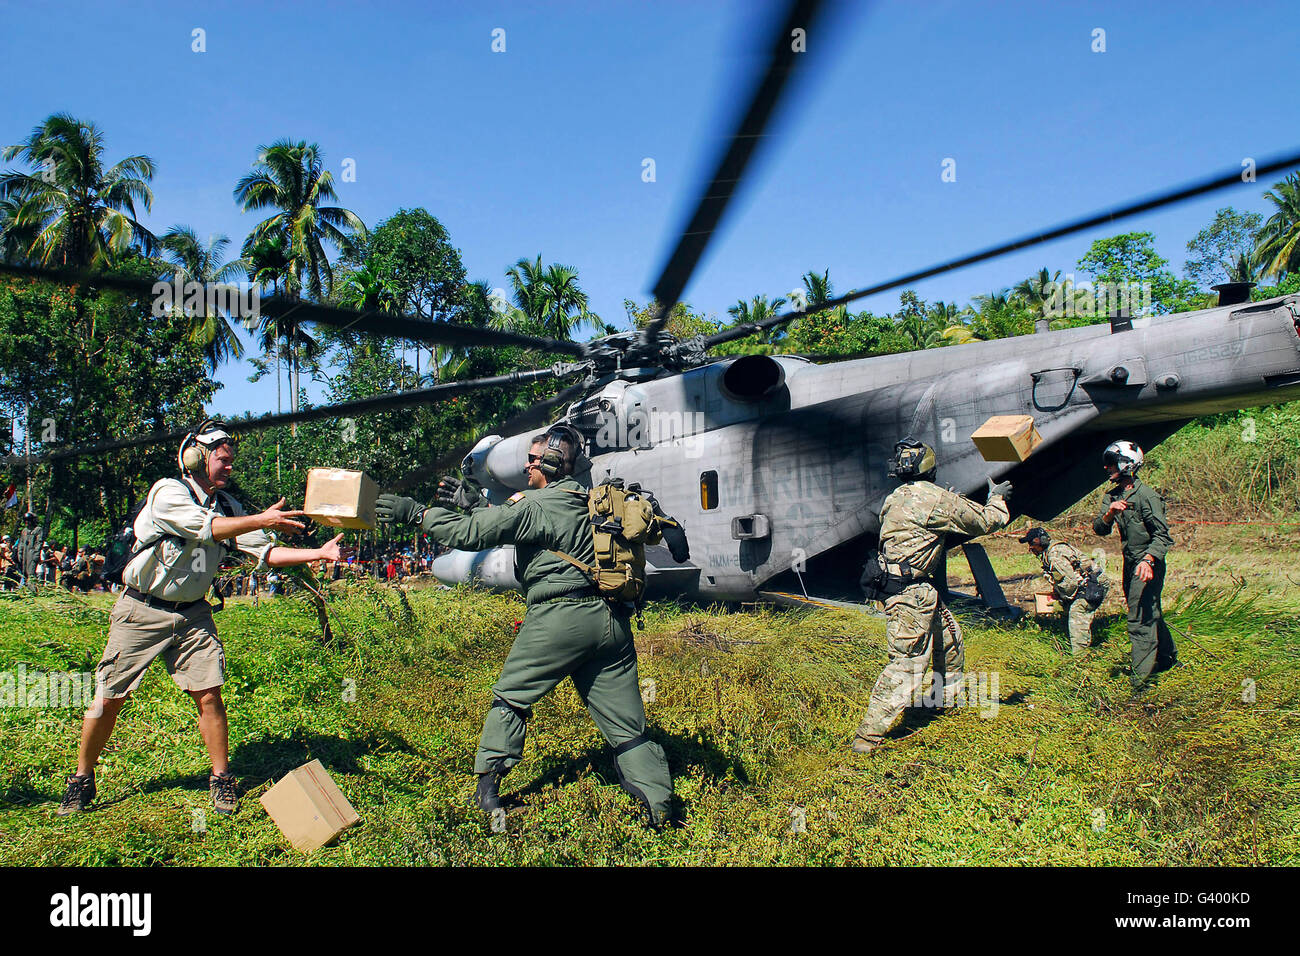 U.S. Airmen and Marines unload relief supplies from a CH-53E Super Stallion helicopter in Indonesia. Stock Photo